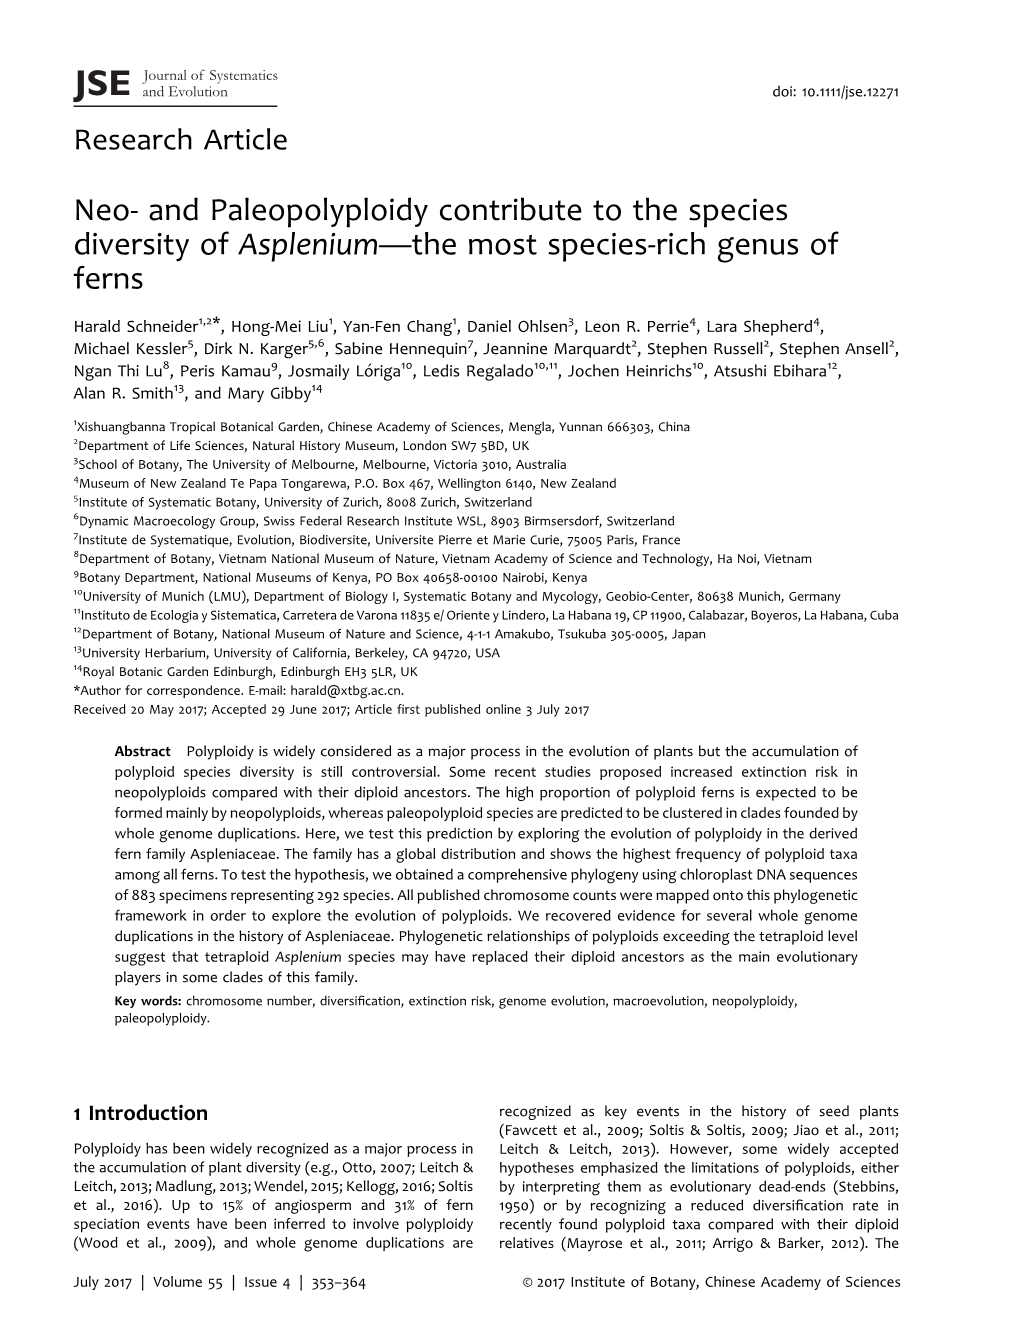 Neo- and Paleopolyploidy Contribute to the Species Diversity of Asplenium—The Most Species-Rich Genus of Ferns